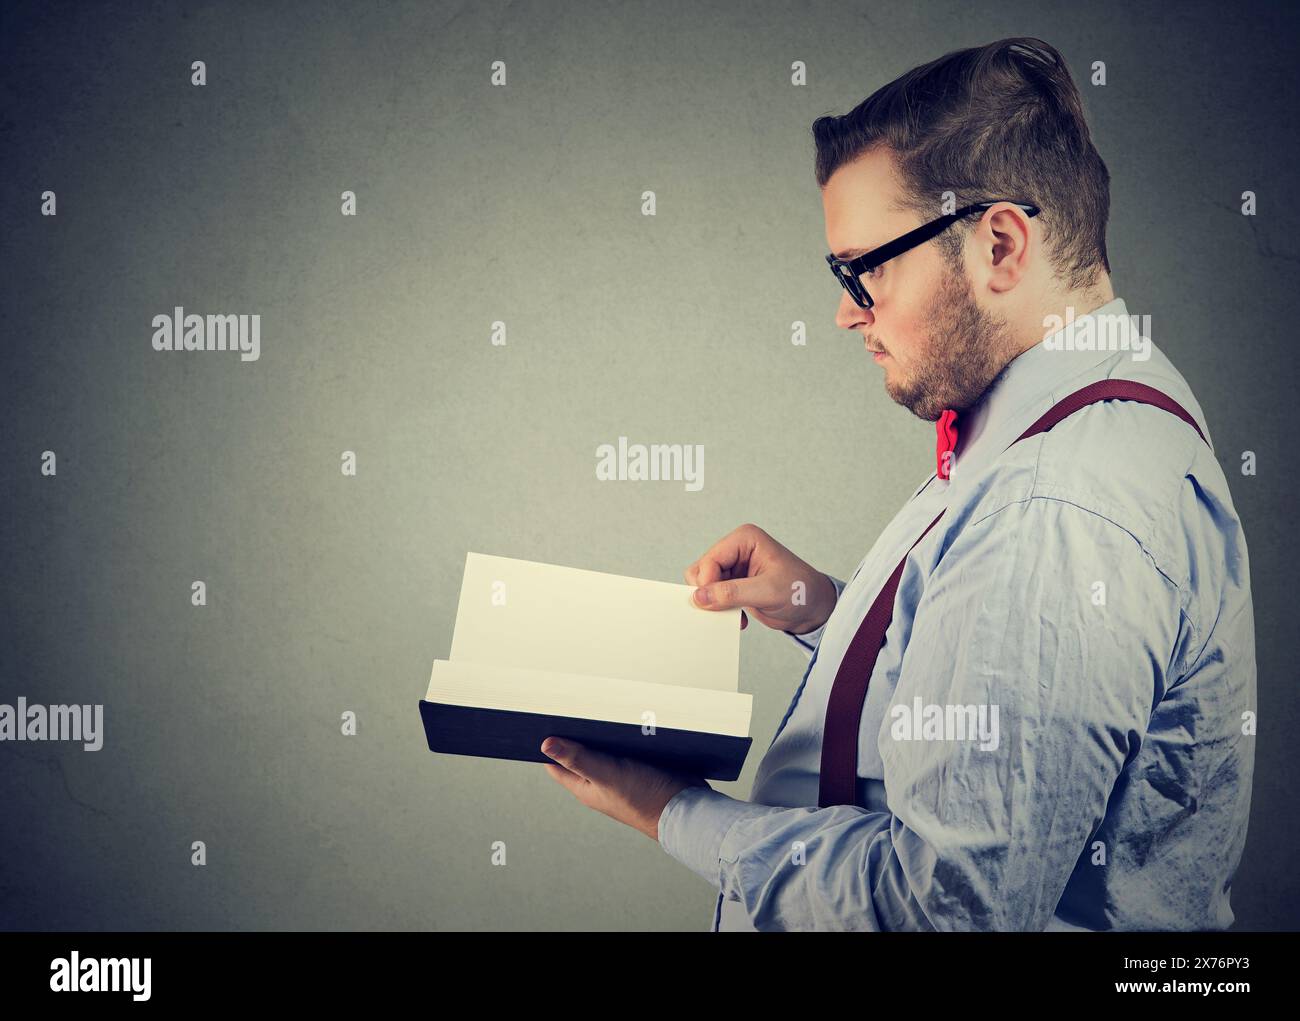 Side profile of a businessman reading a book Stock Photo